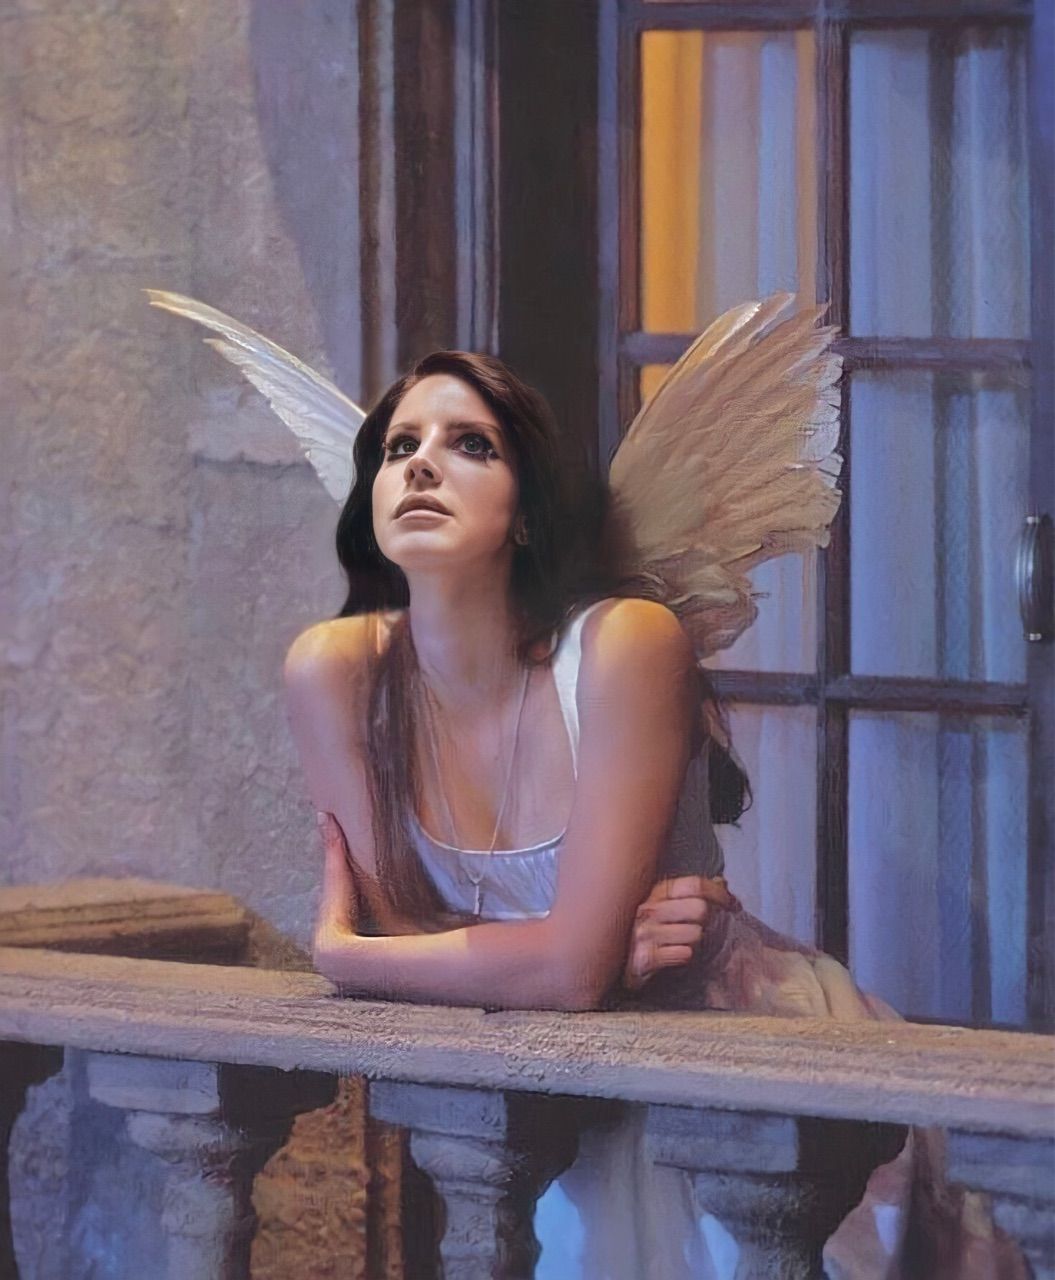 An oil painting of a woman with wings looking out of a window - Lana Del Rey